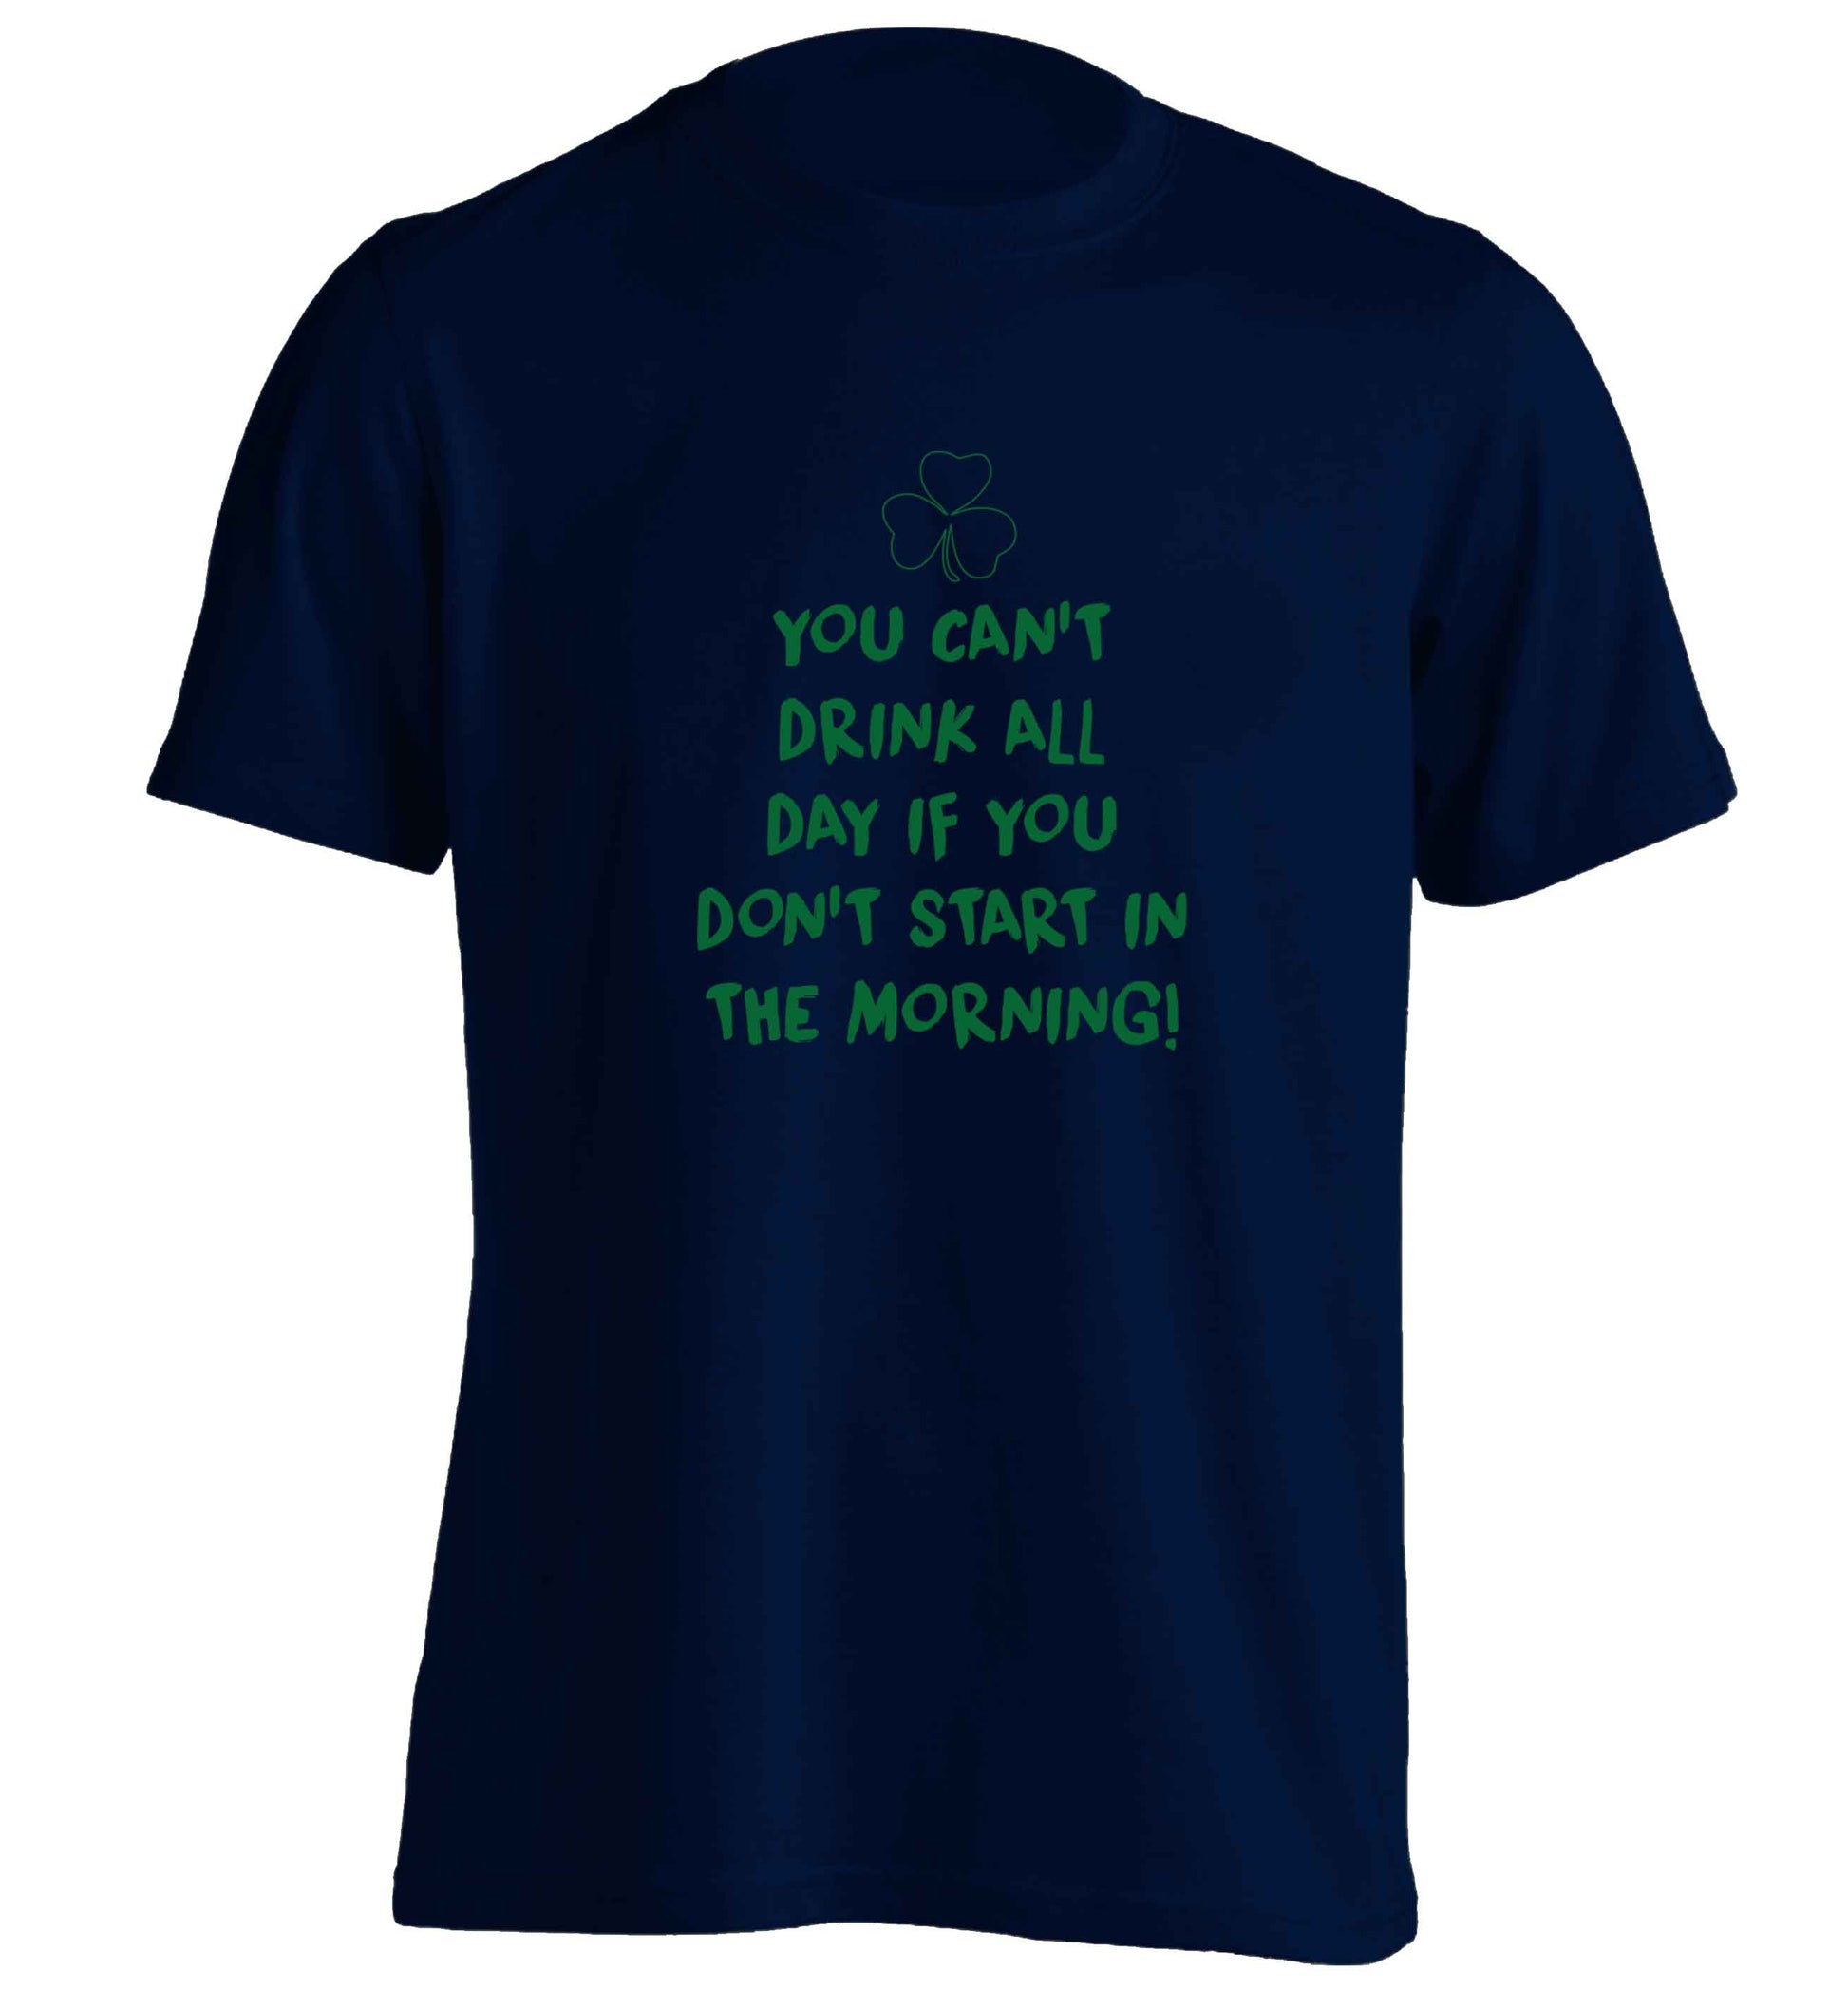 You can't drink all day if you don't start in the morning adults unisex navy Tshirt 2XL